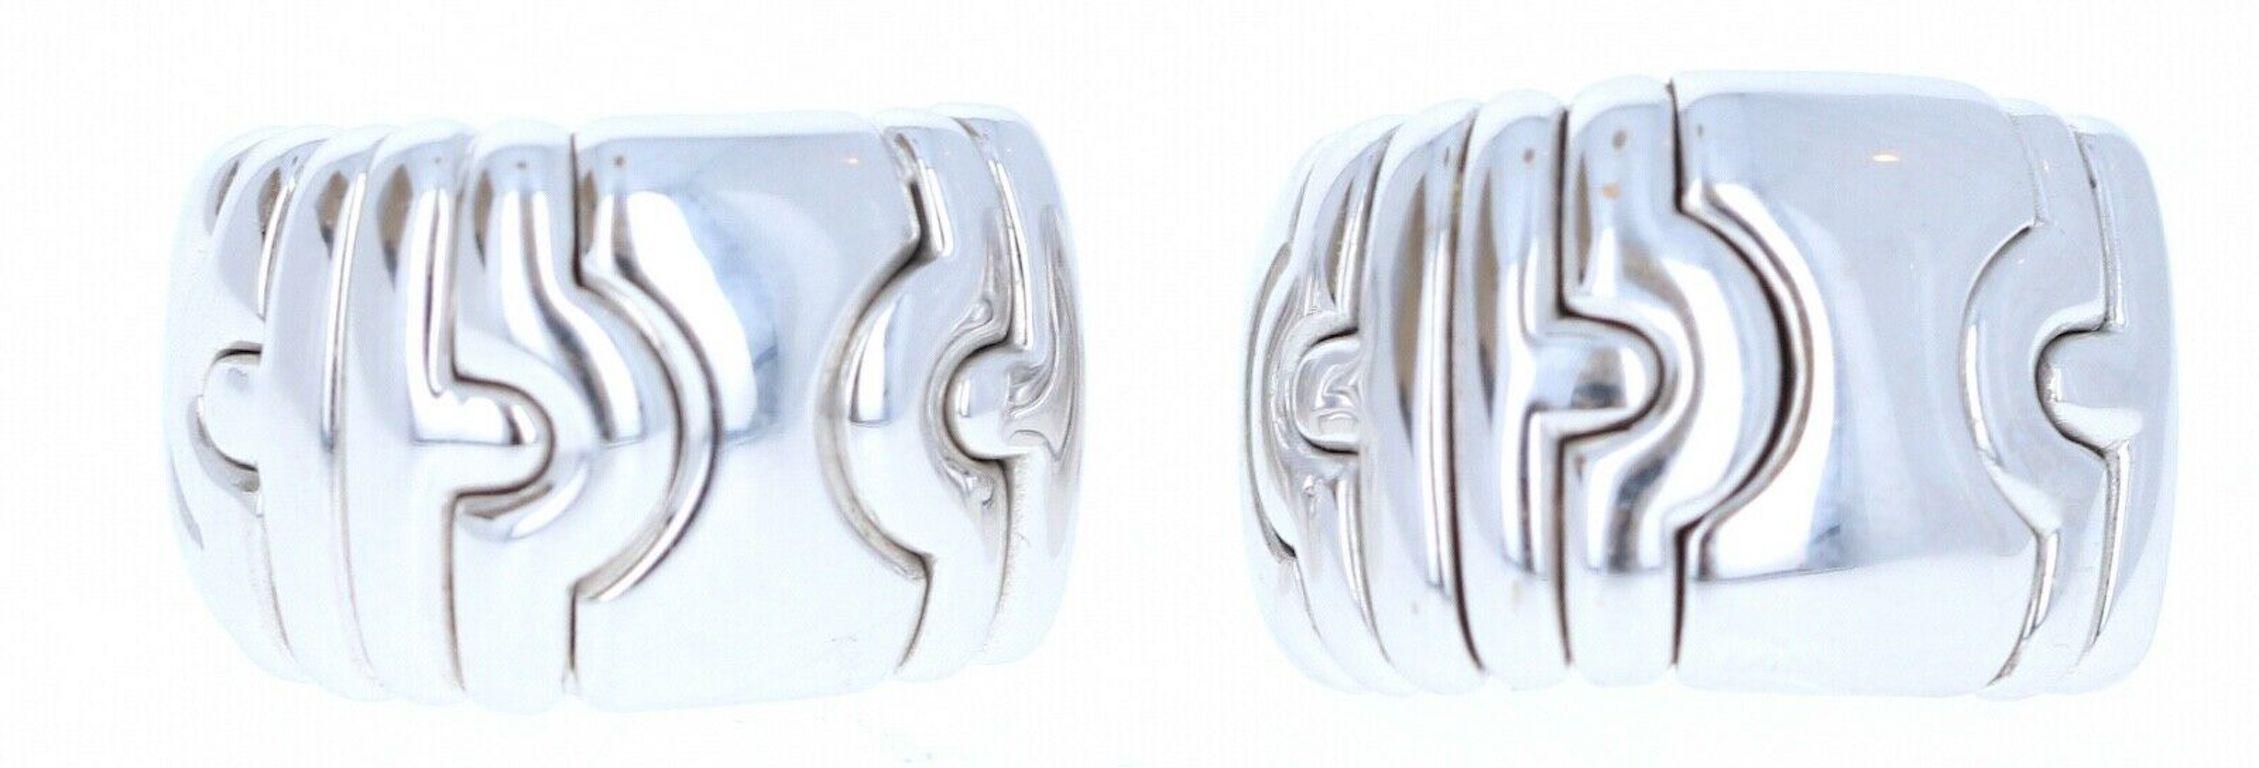 Bvlgari Bulgari 18k White Gold Parentesi Huggie Hoop Earrings 21g

For sale is a pair of 18k white gold huggie hoop earrings. 
The earrings are from the parentesi collection
Perfect worn day or night. 
Get them now!




Metal: 18k white gold

Brand: